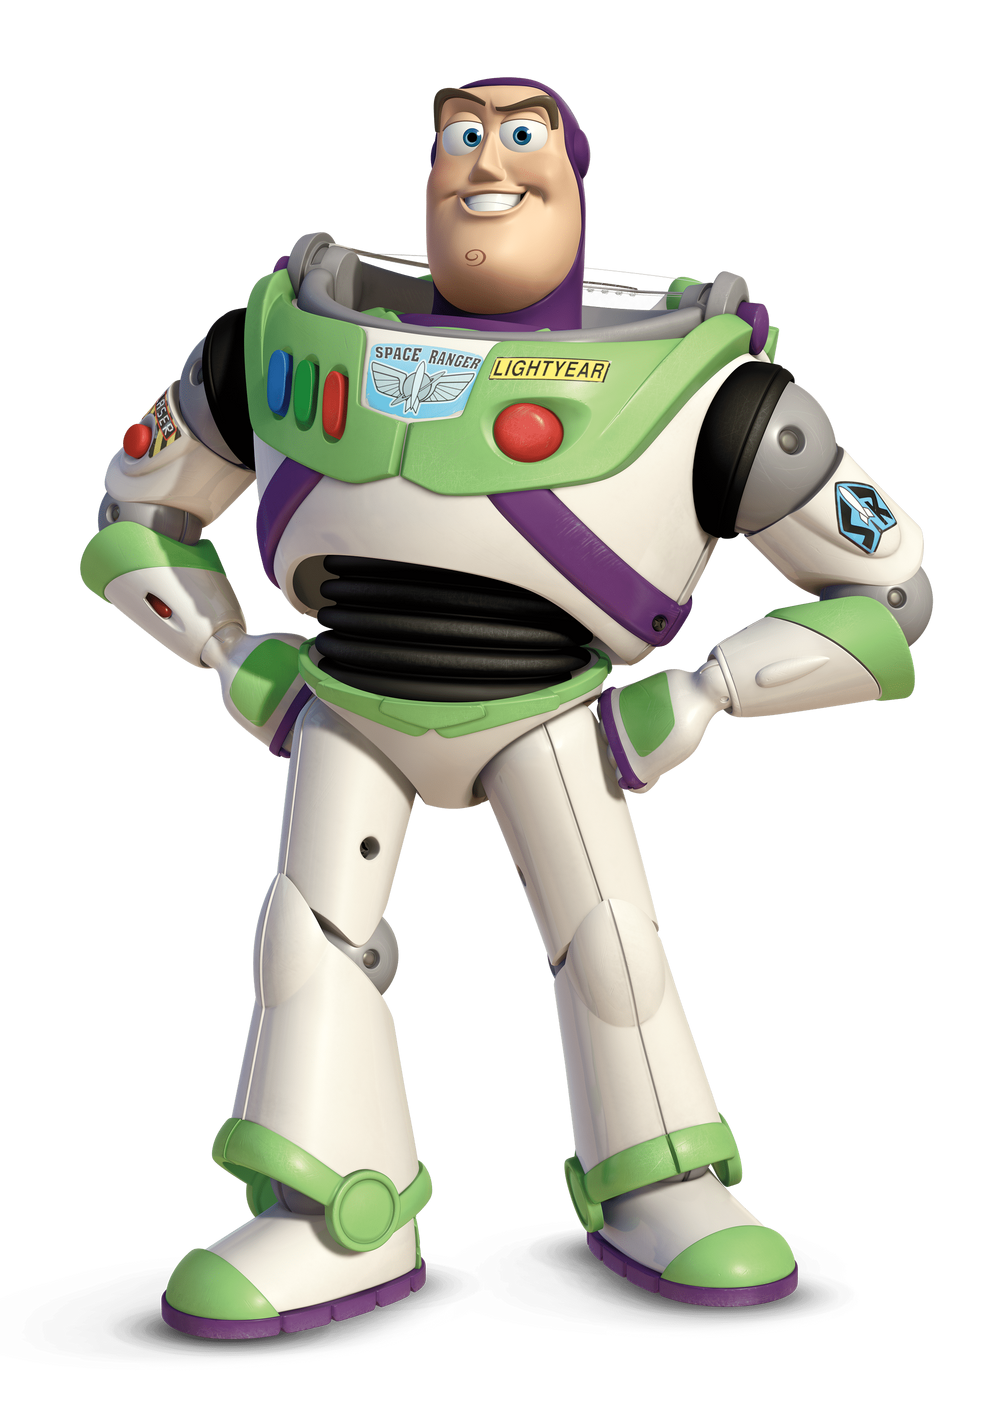 toy-story-5-confirmed-to-bring-back-woody-and-buzz-lightyear